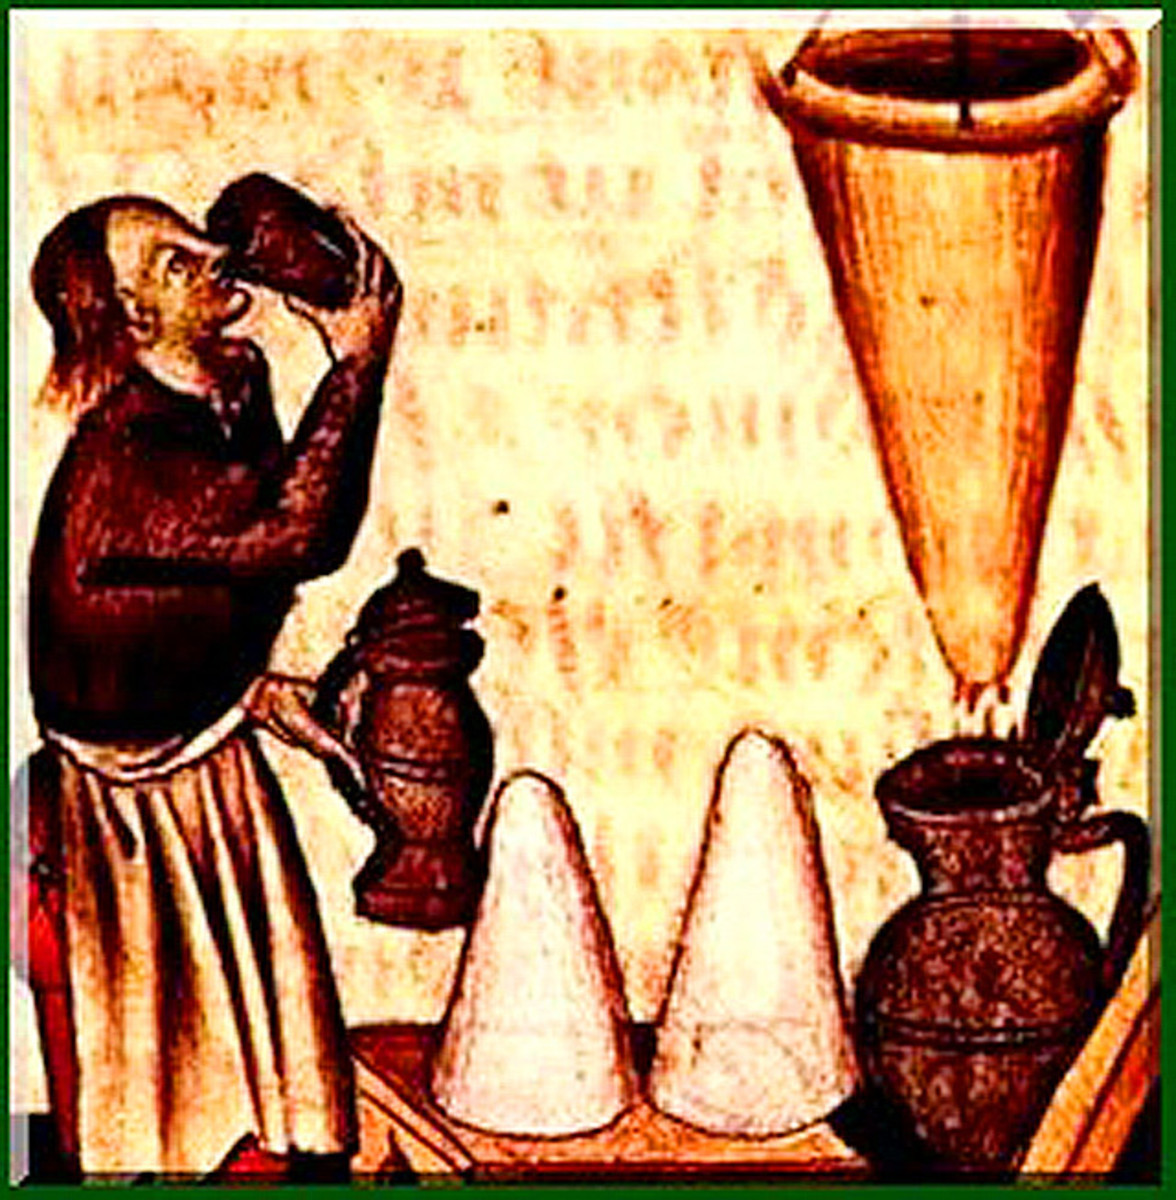 Hippocrates's sleeve being used to make delicious hippocras wine